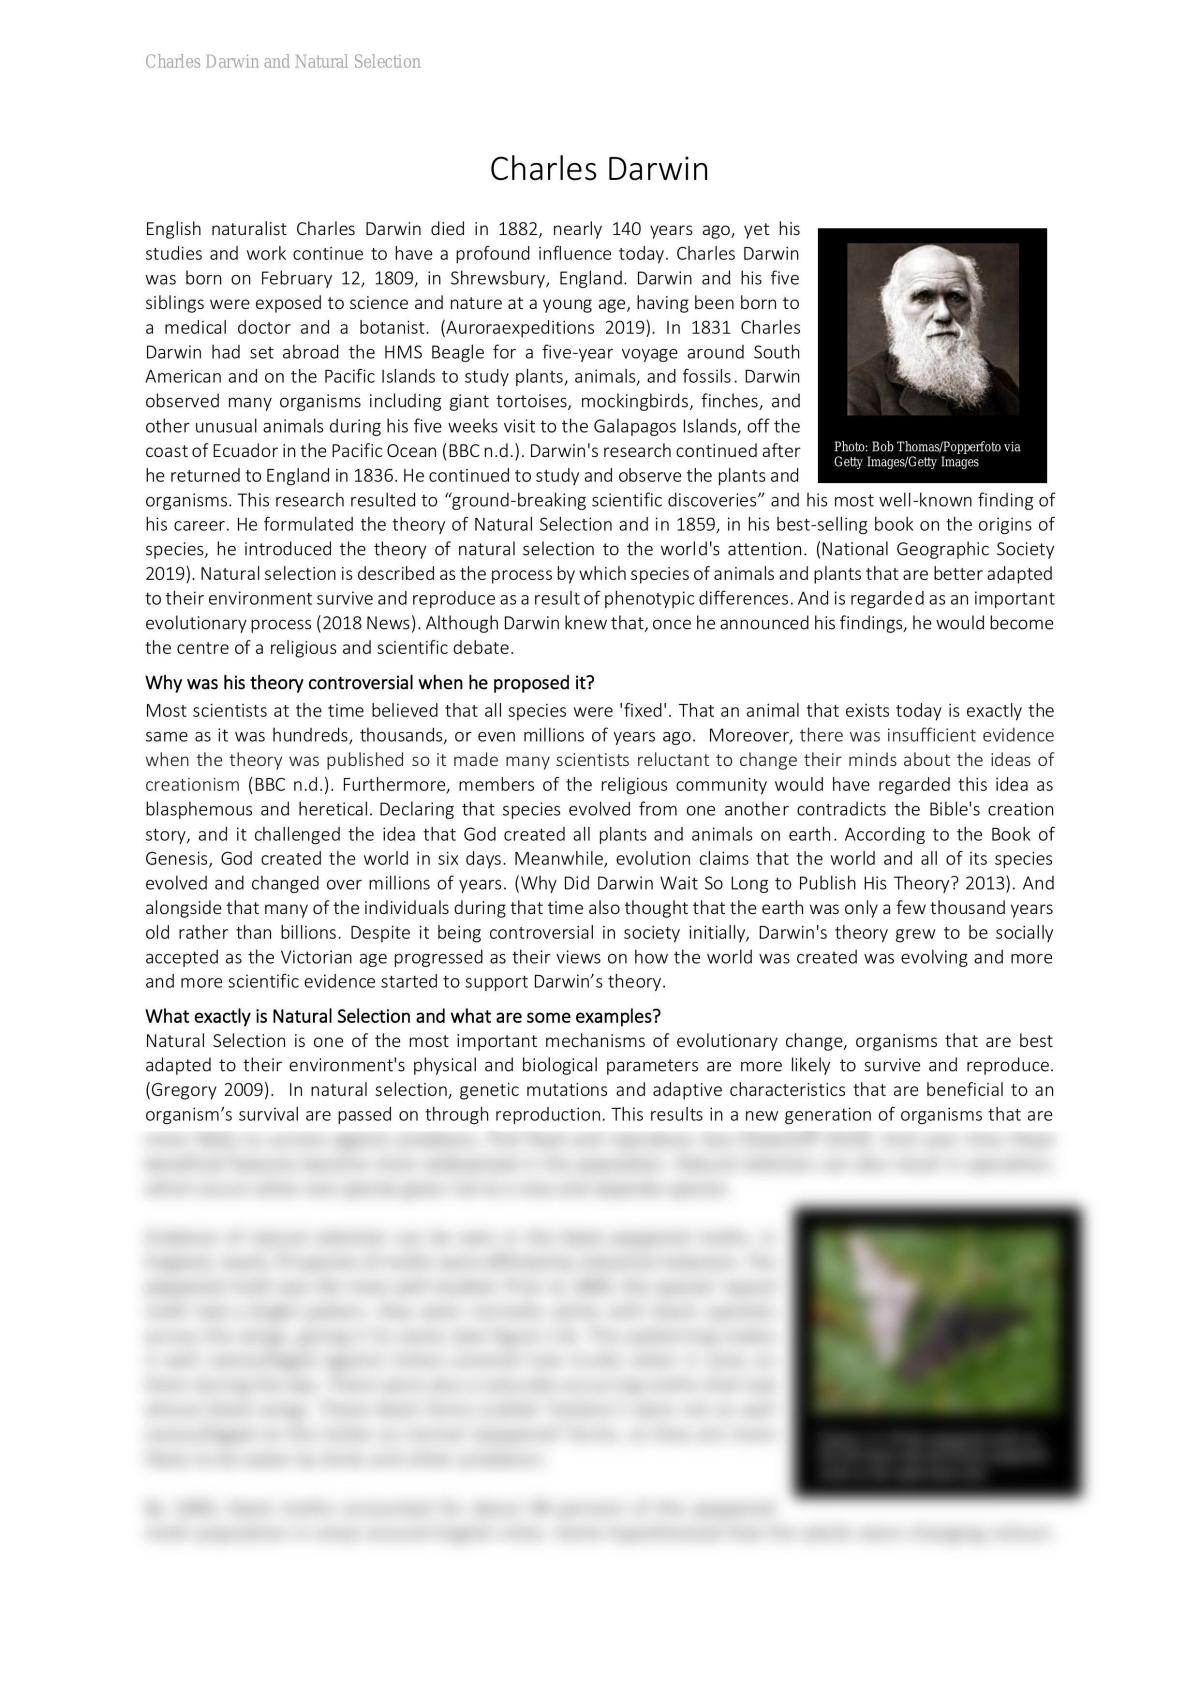 research paper on charles darwin